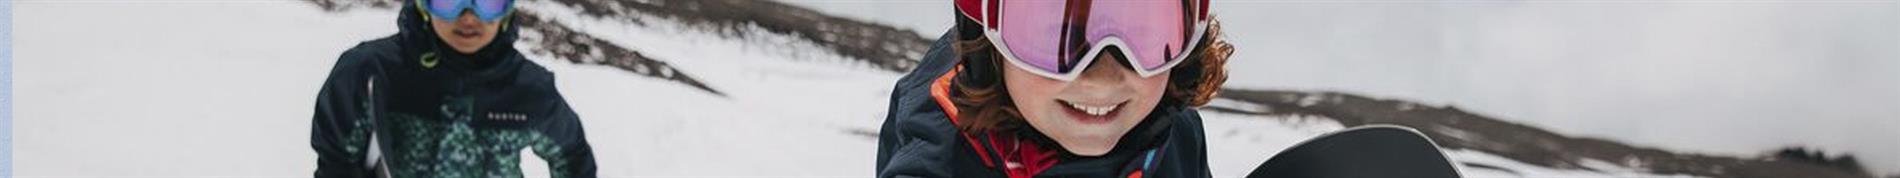 Under Armour Kids Ski & Snowboard Clothing (Ages 6-16) 